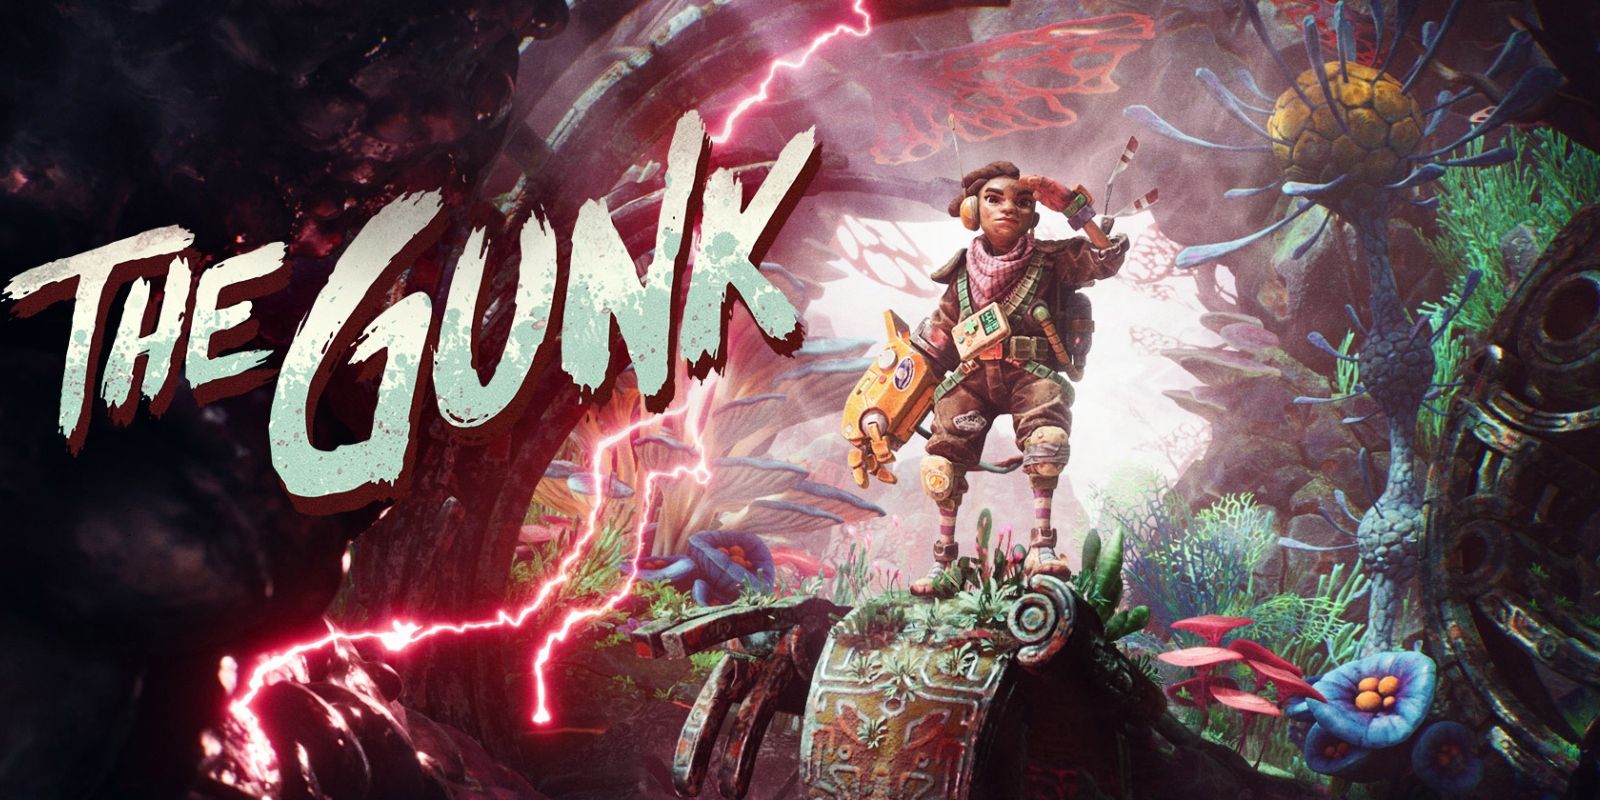 Key art for the indie game The Gunk